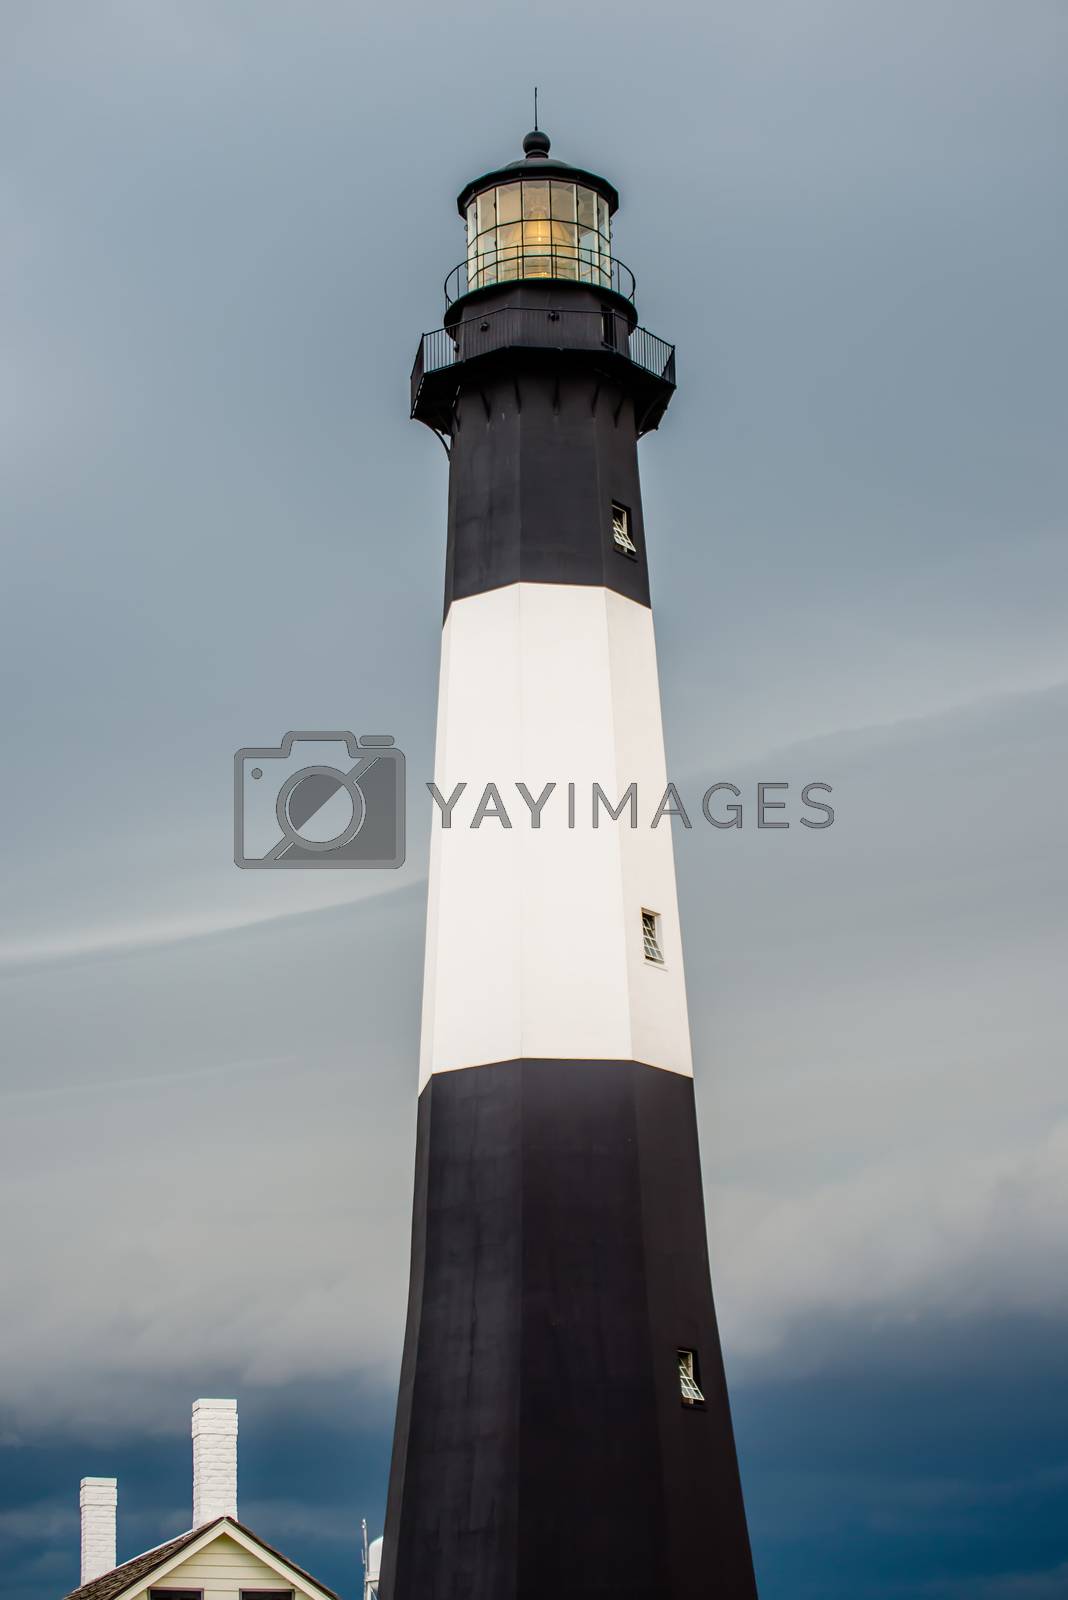 Royalty free image of Tybee Island Light with storm approaching by digidreamgrafix